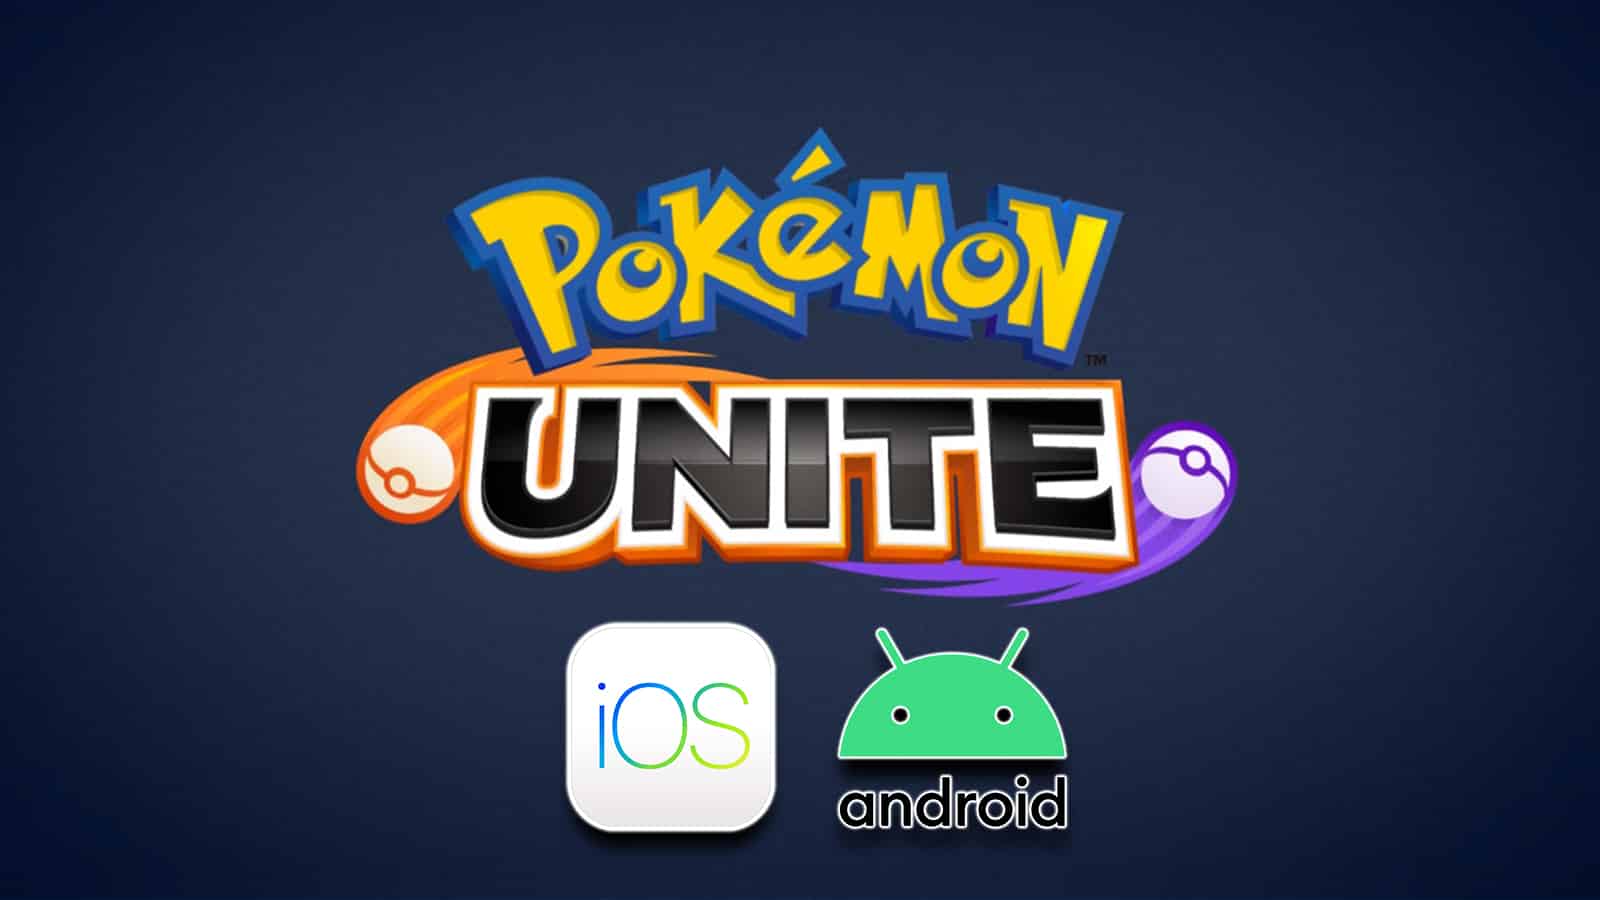 Pokemon Unite Mobile iOS and Android